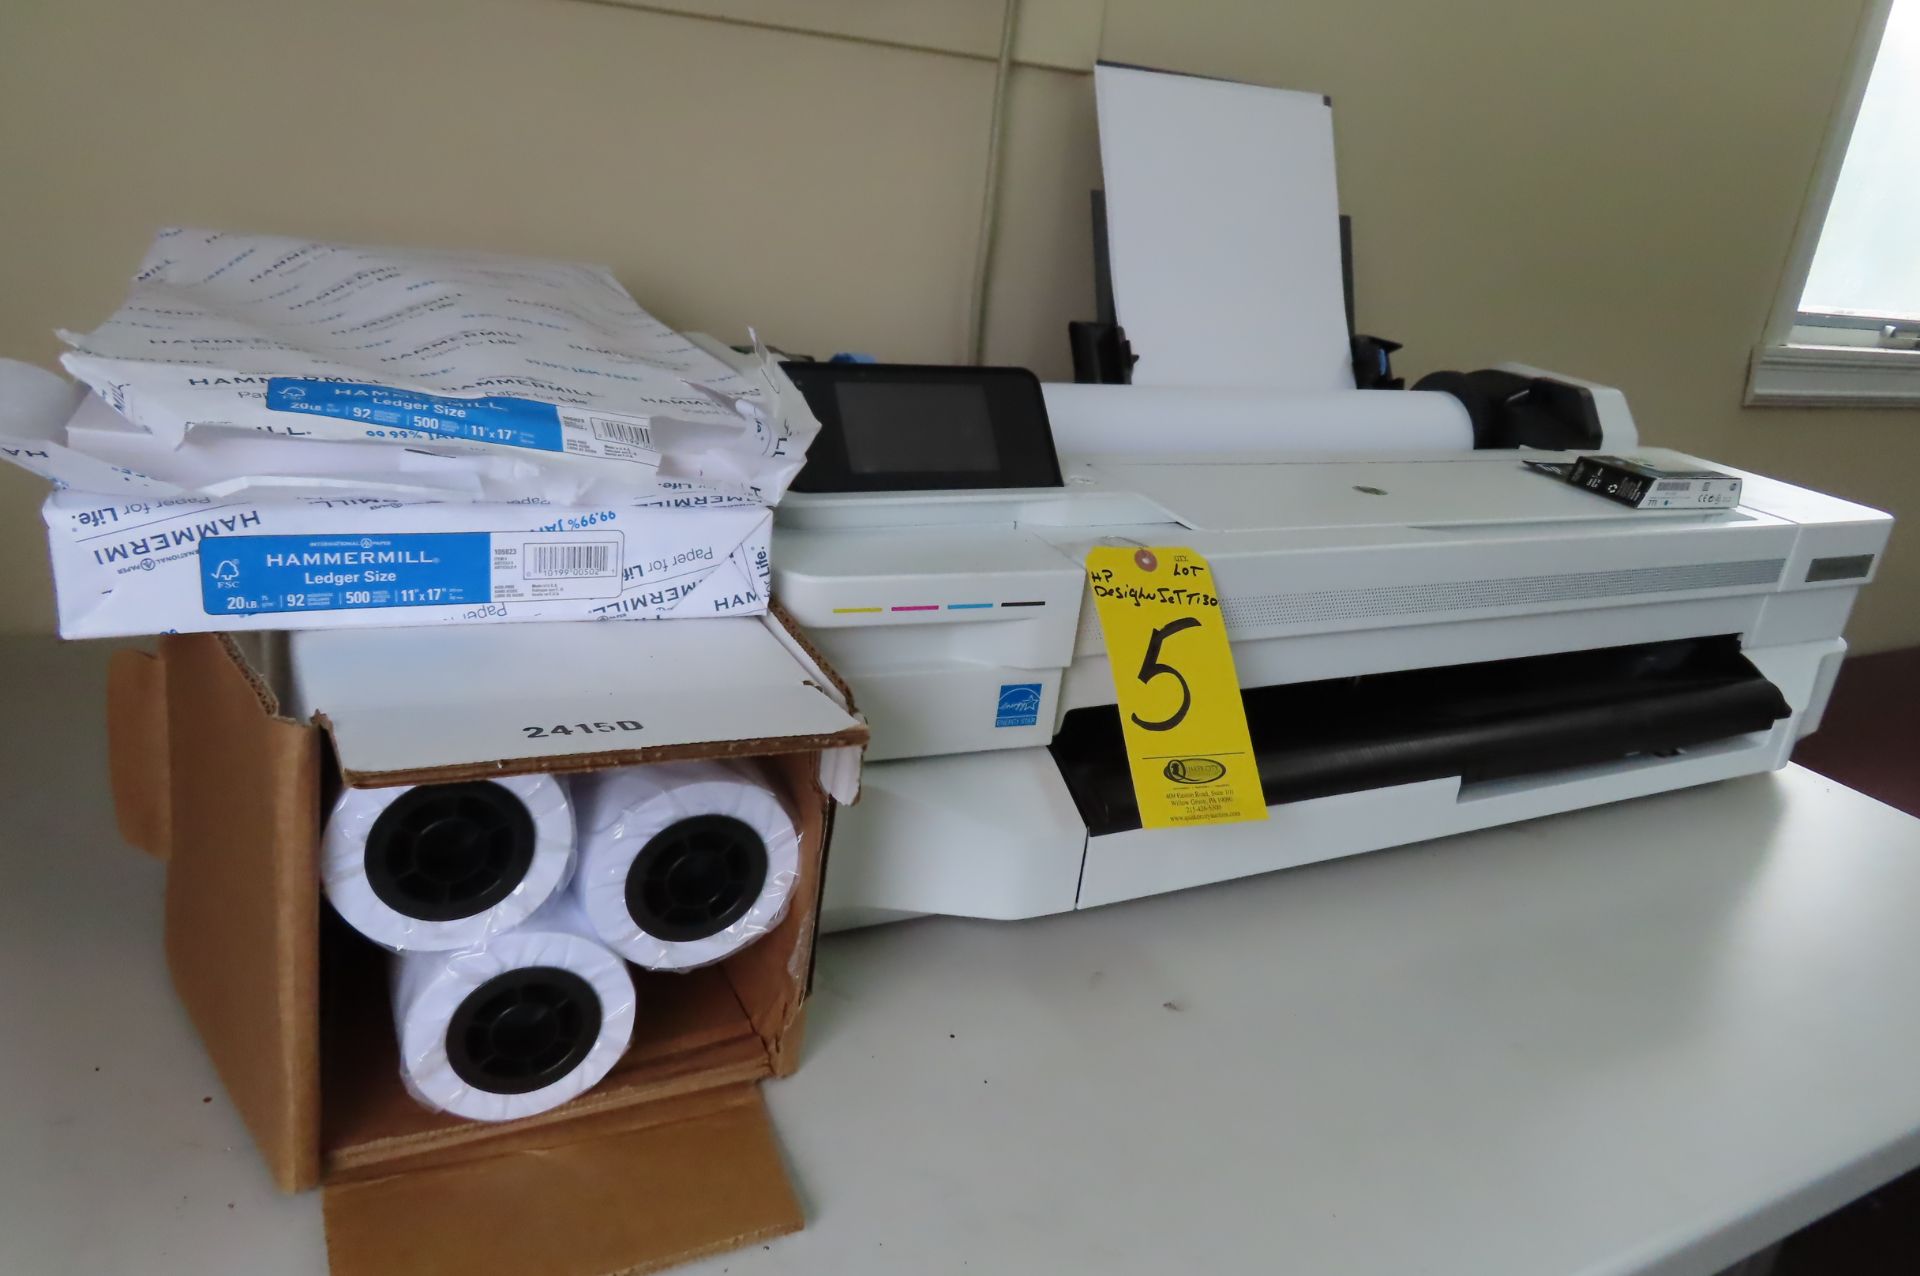 HP DESIGN JET T130 26 IN. WIDE-FORMAT PRINTER WITH PAPER ROLLS AND SHEET-FED CASSETTE, (3) ROLLS - Image 3 of 3